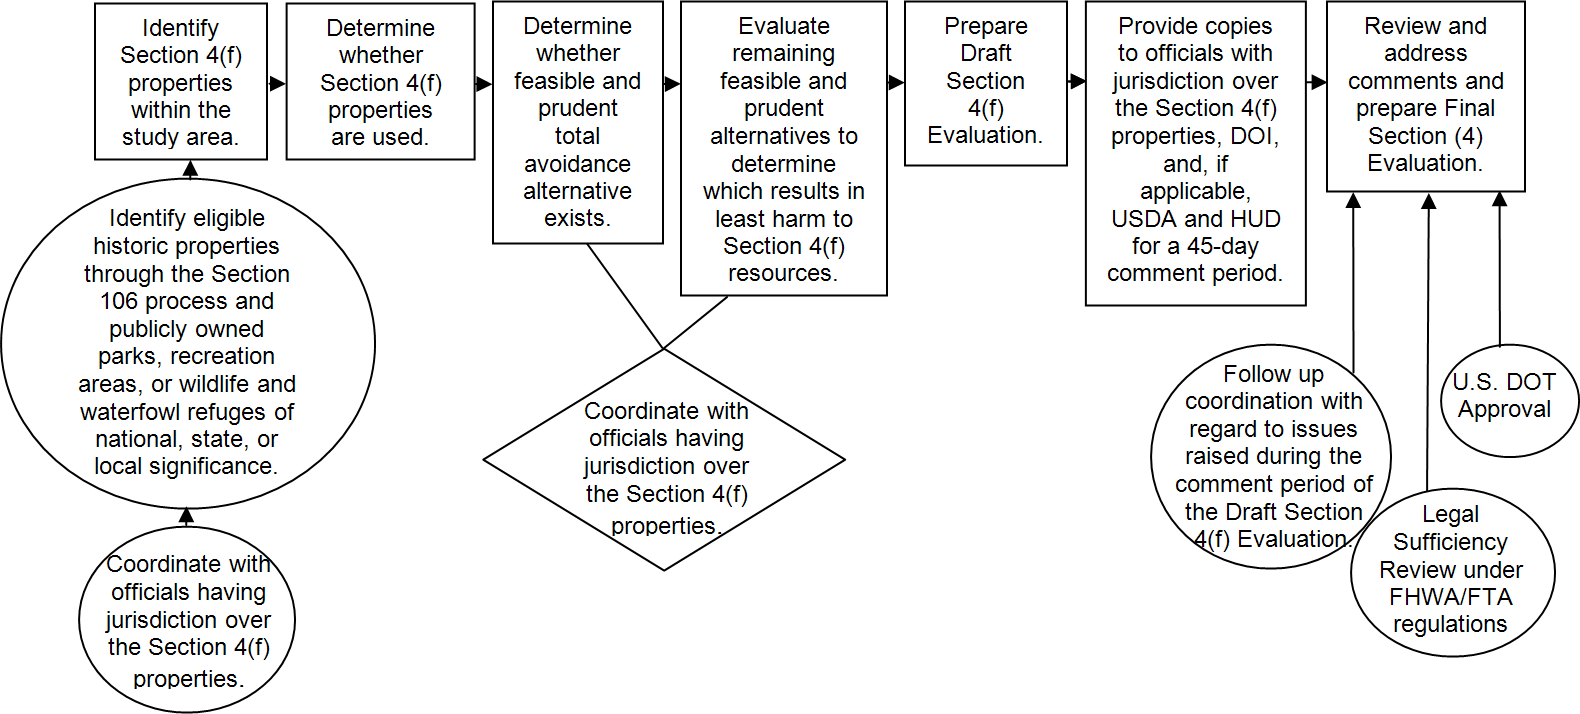 Flowchart of the Section 4(f) process, including coordinating with officials with jurisdiction, identifying eligible properties, determining whether Section 4(f) properties are used, determining and evaluating alternatives , preparing a draft, distributing copies, and preparing the Final Evaluation.